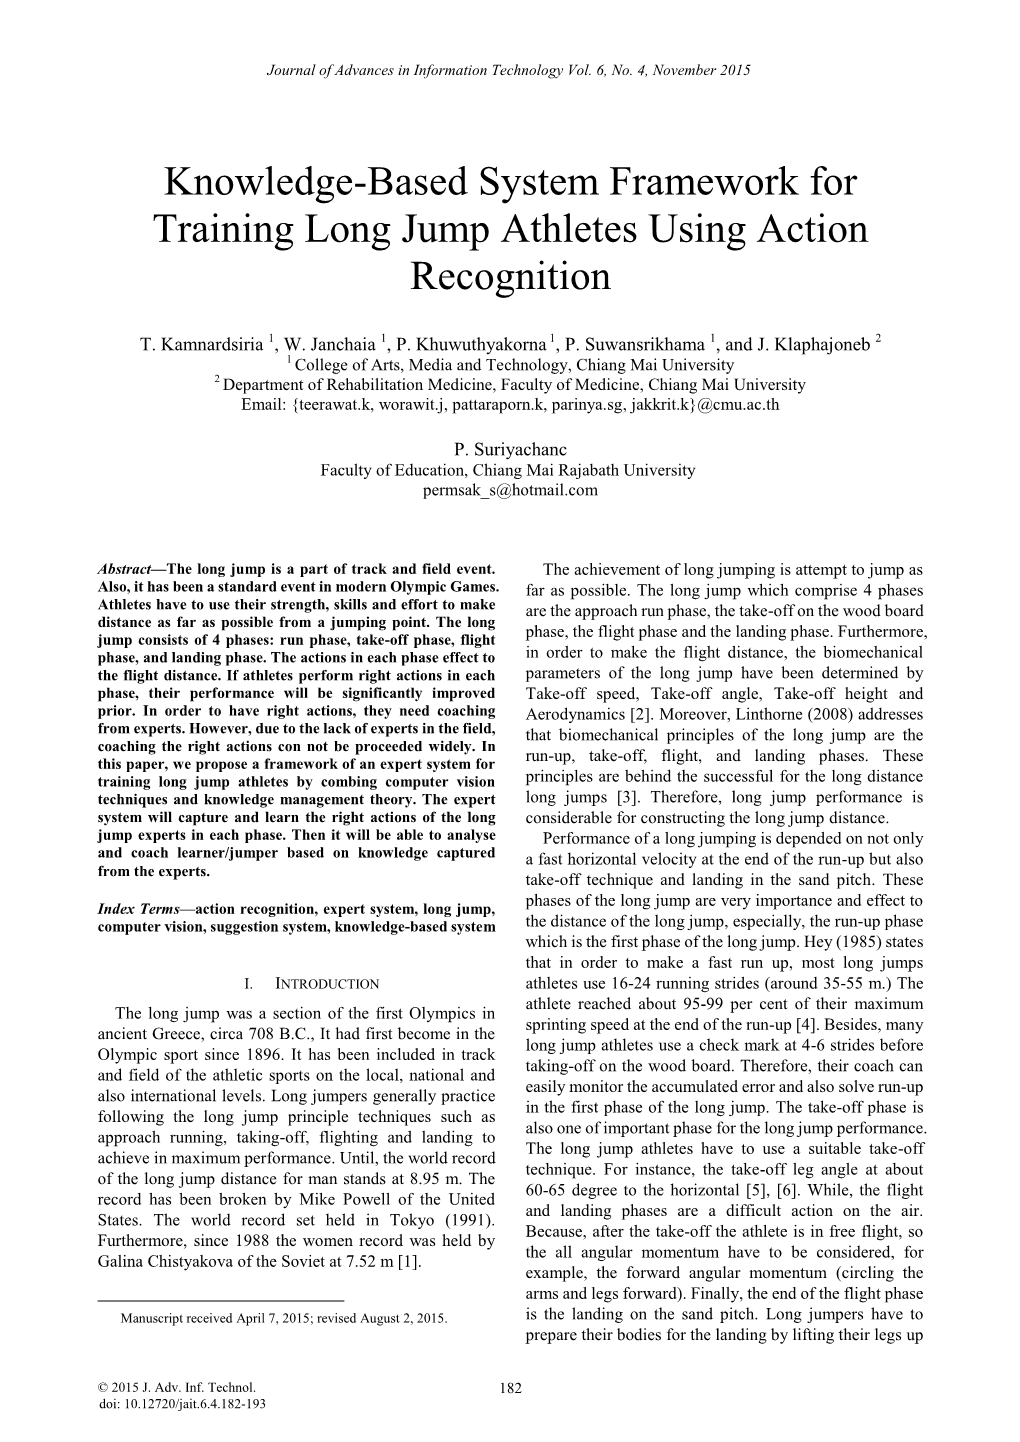 Knowledge-Based System Framework for Training Long Jump Athletes Using Action Recognition